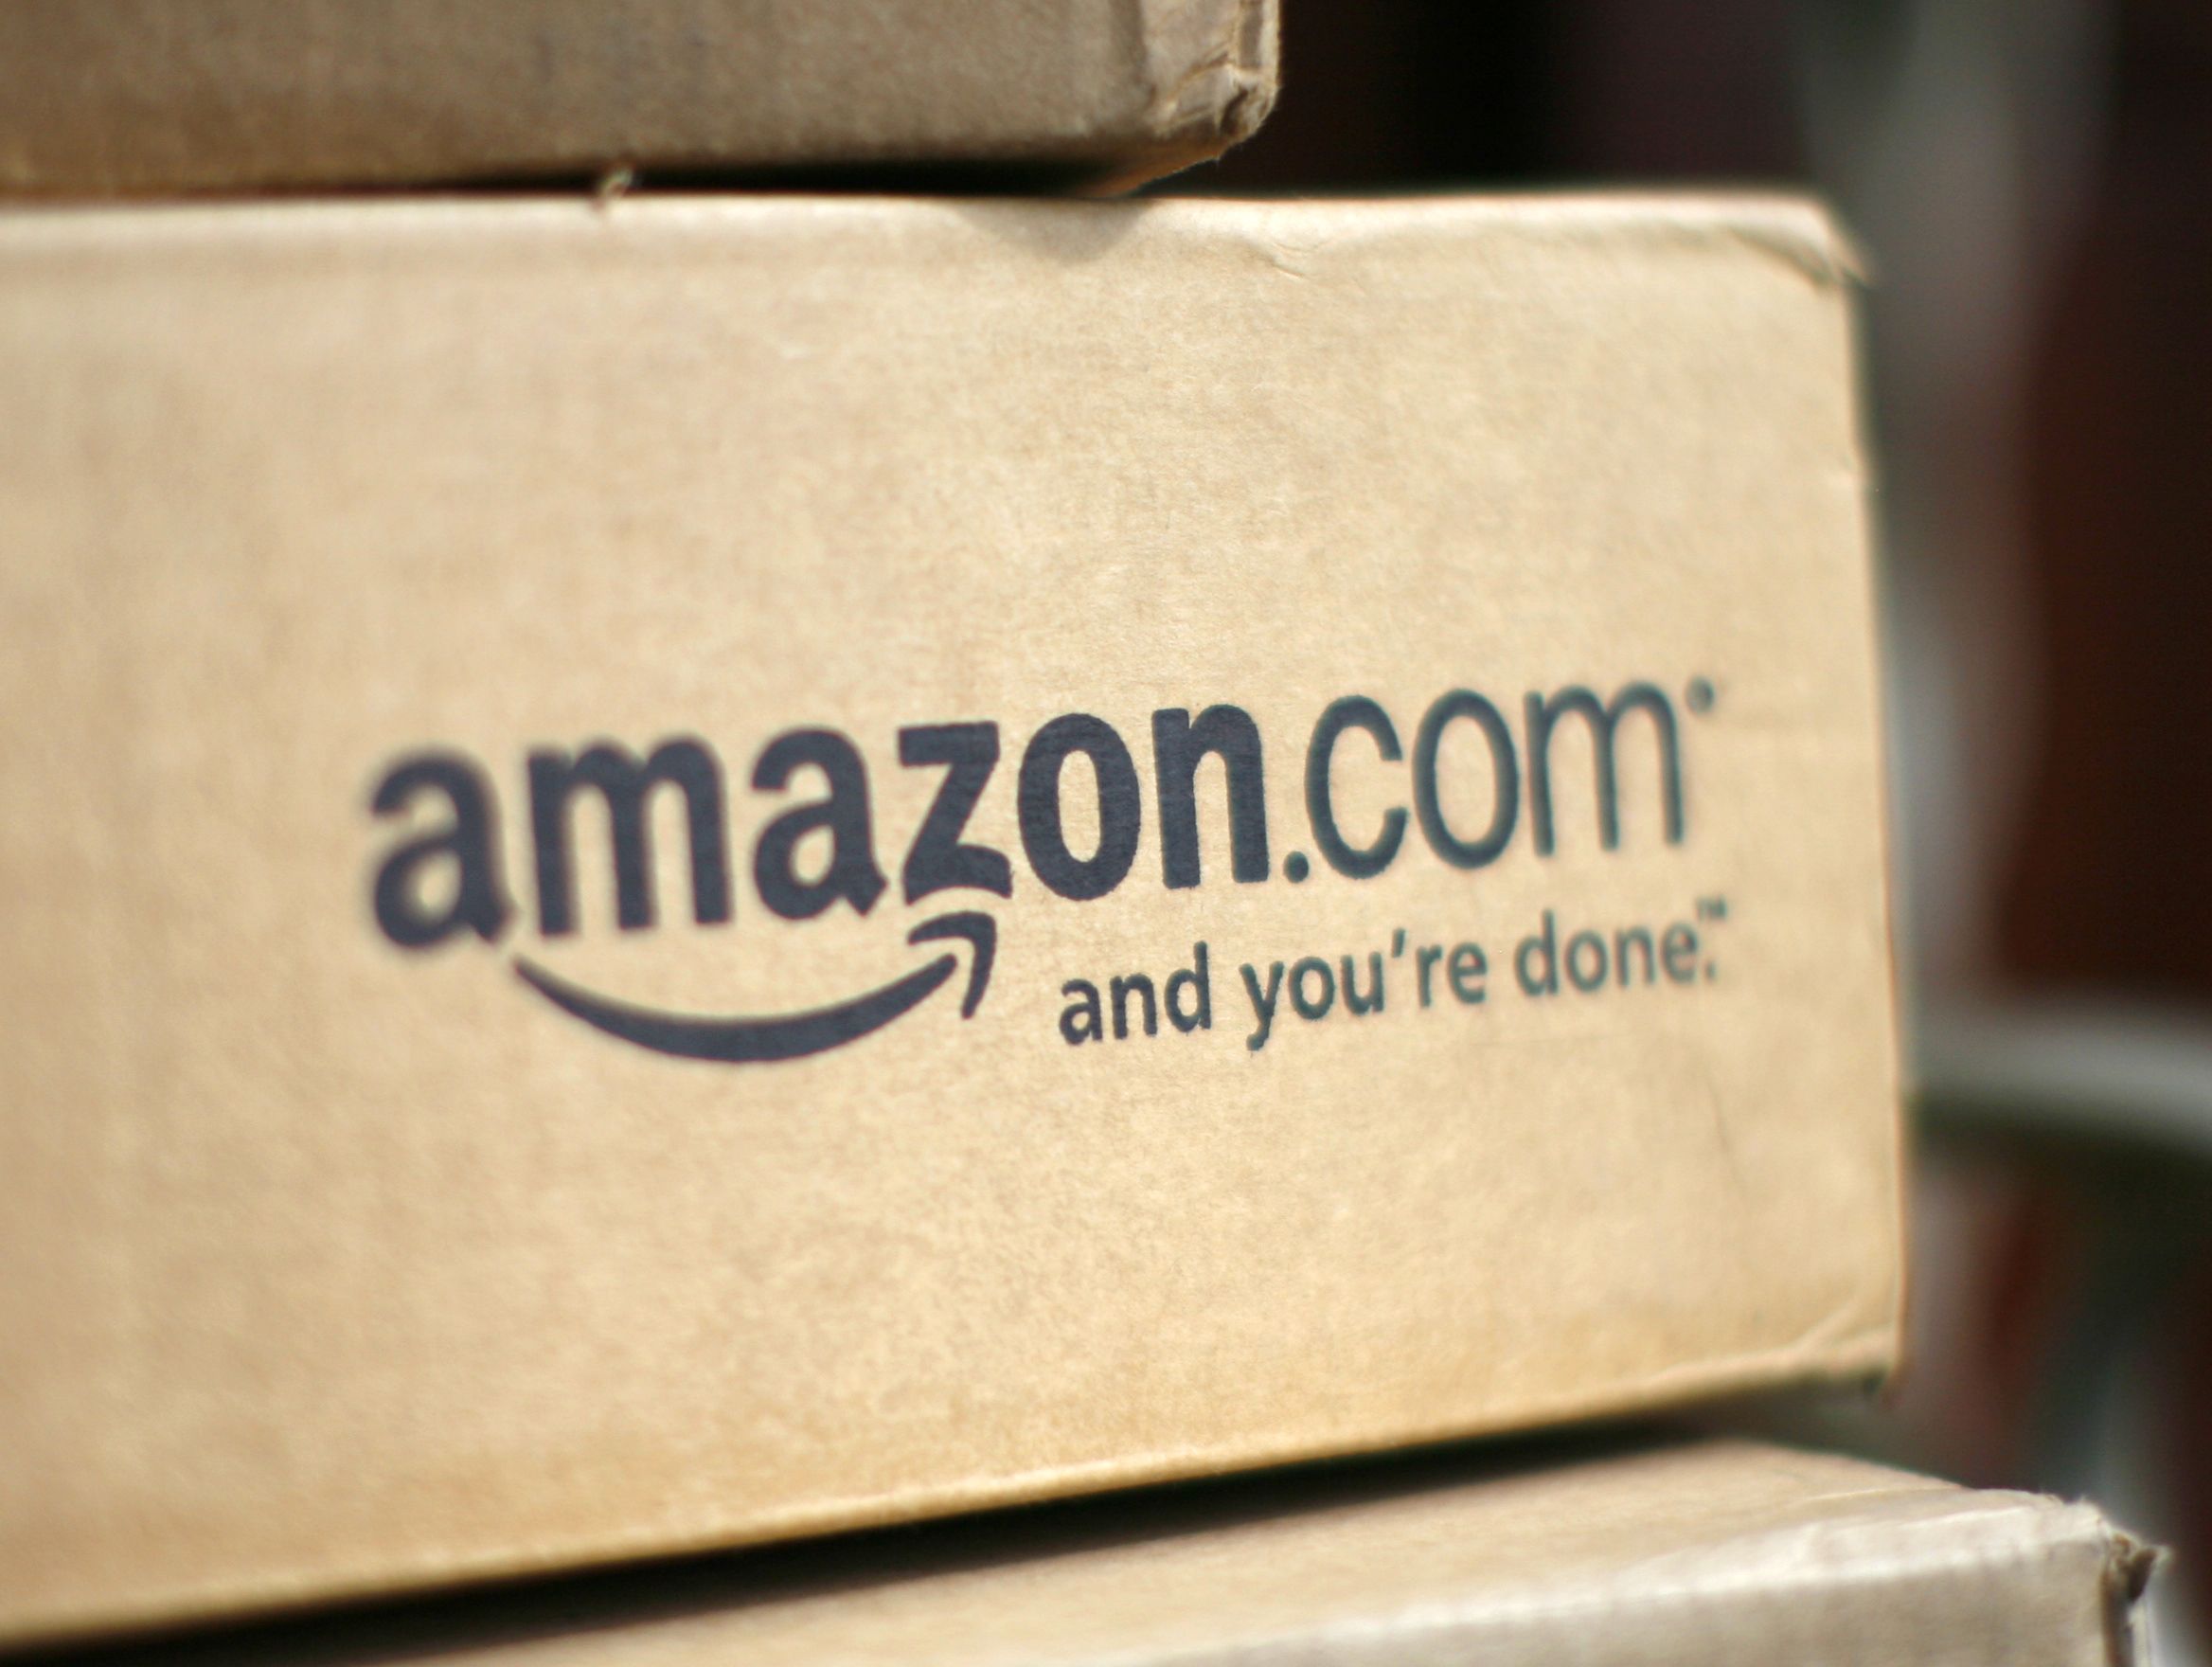 Amazon Cheating Prime Customers? Lawsuit Accuses Online Retailer Of